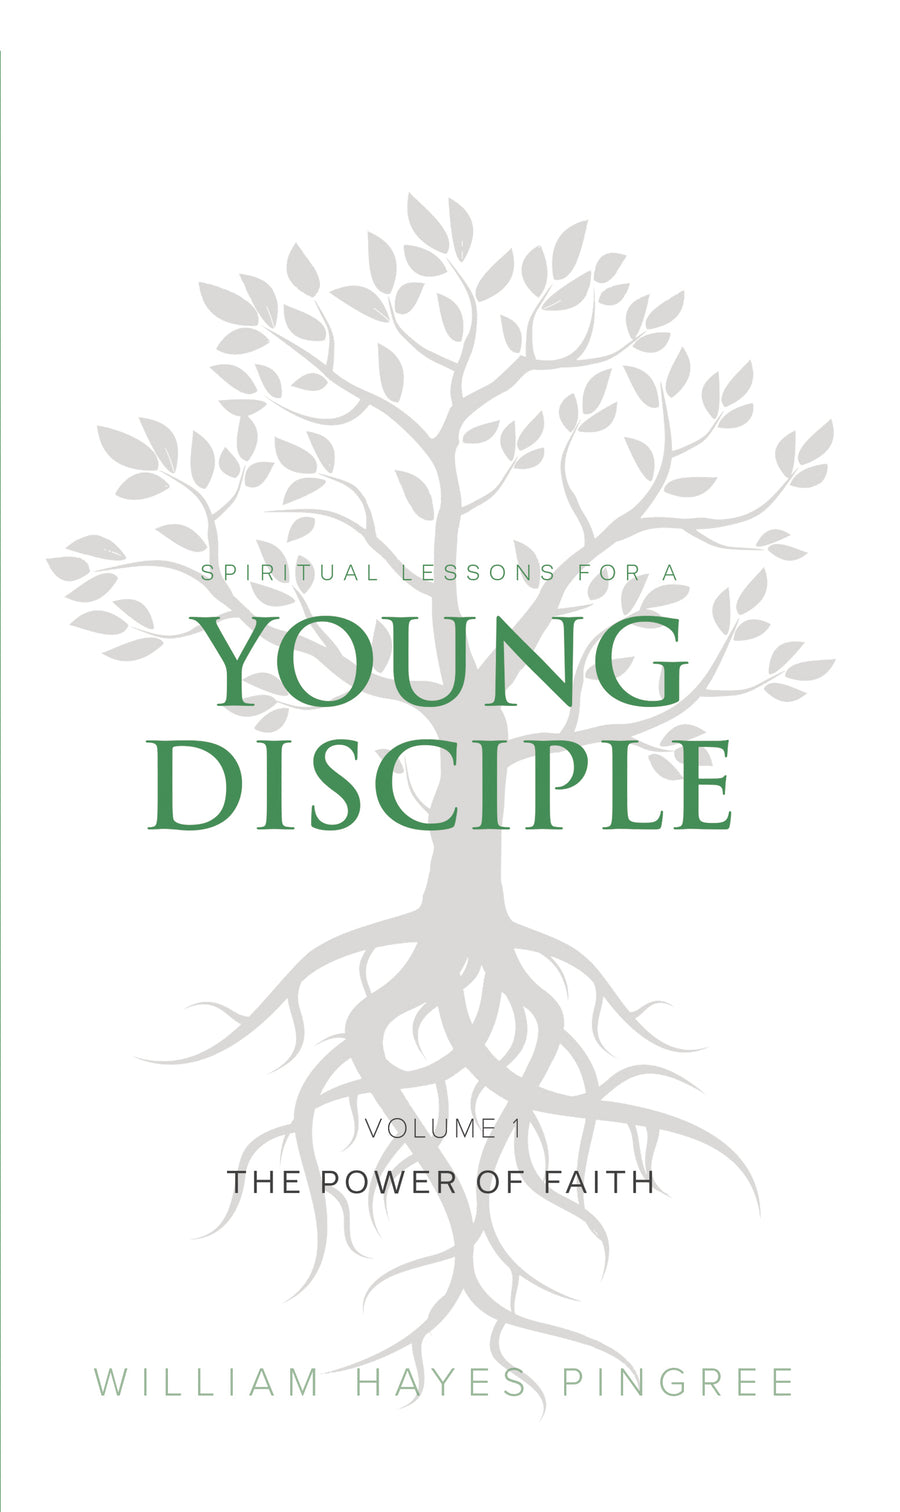 Spiritual Lessons for a Young Disciple